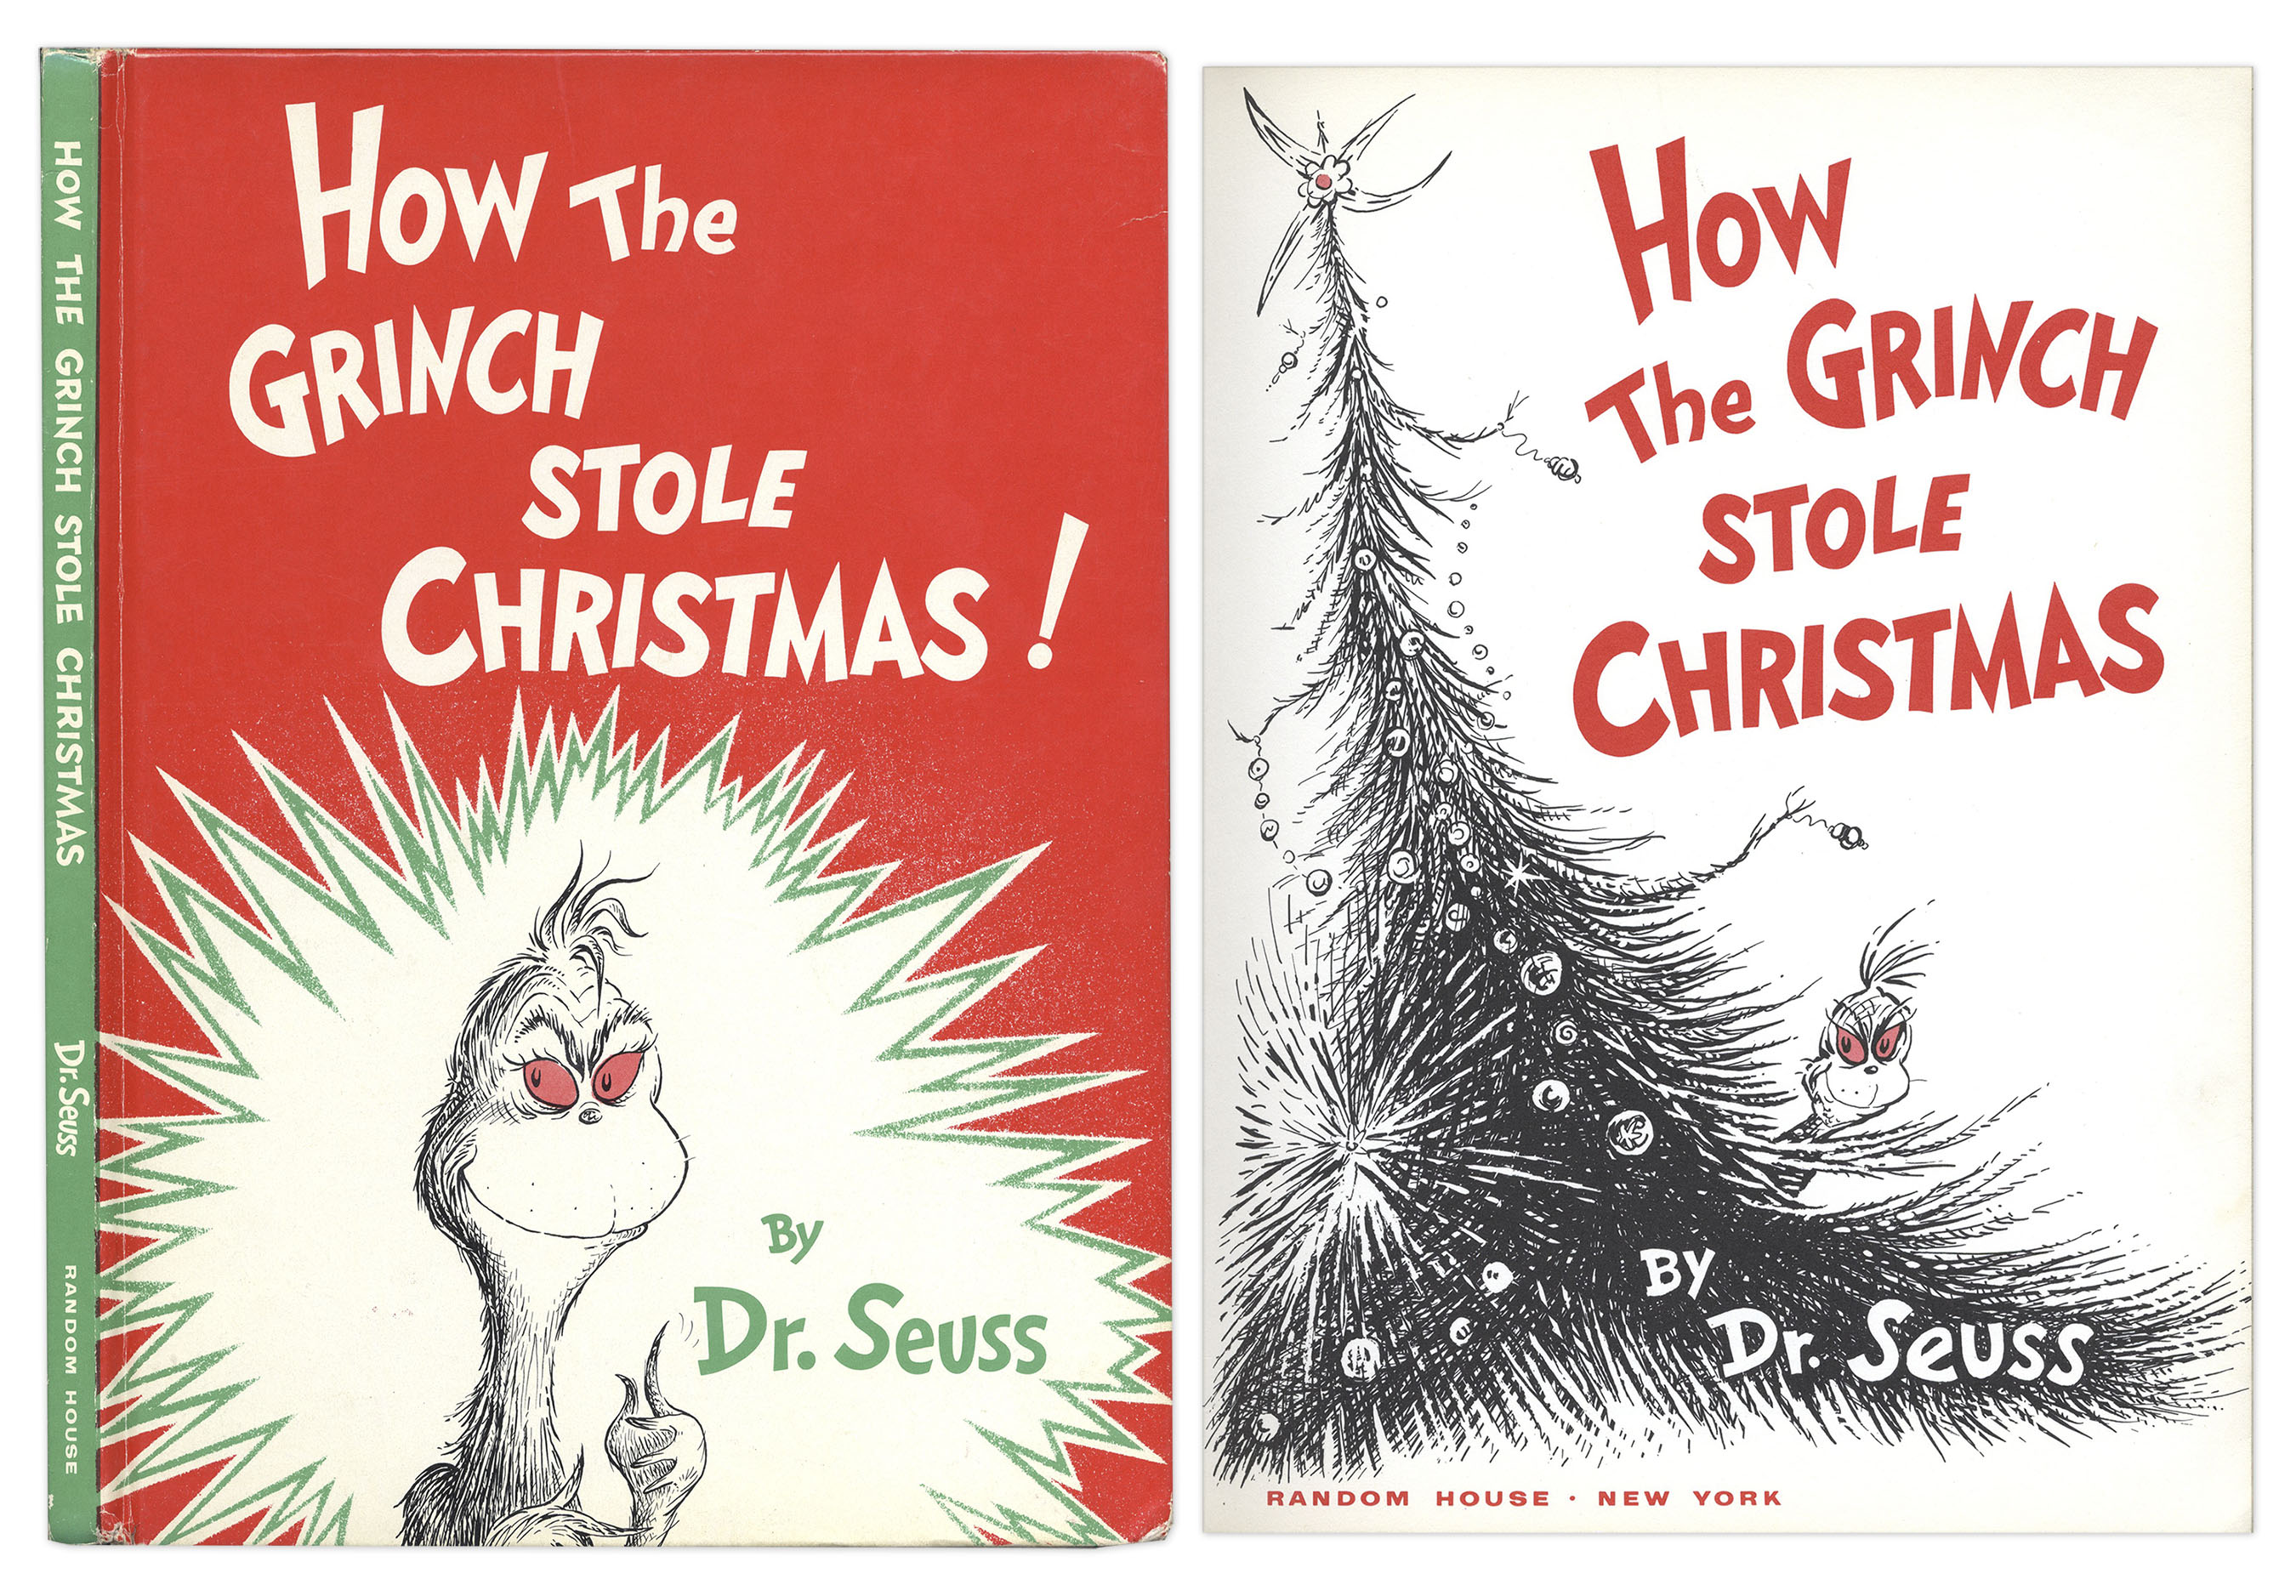 the grinch who stole christmas poem text